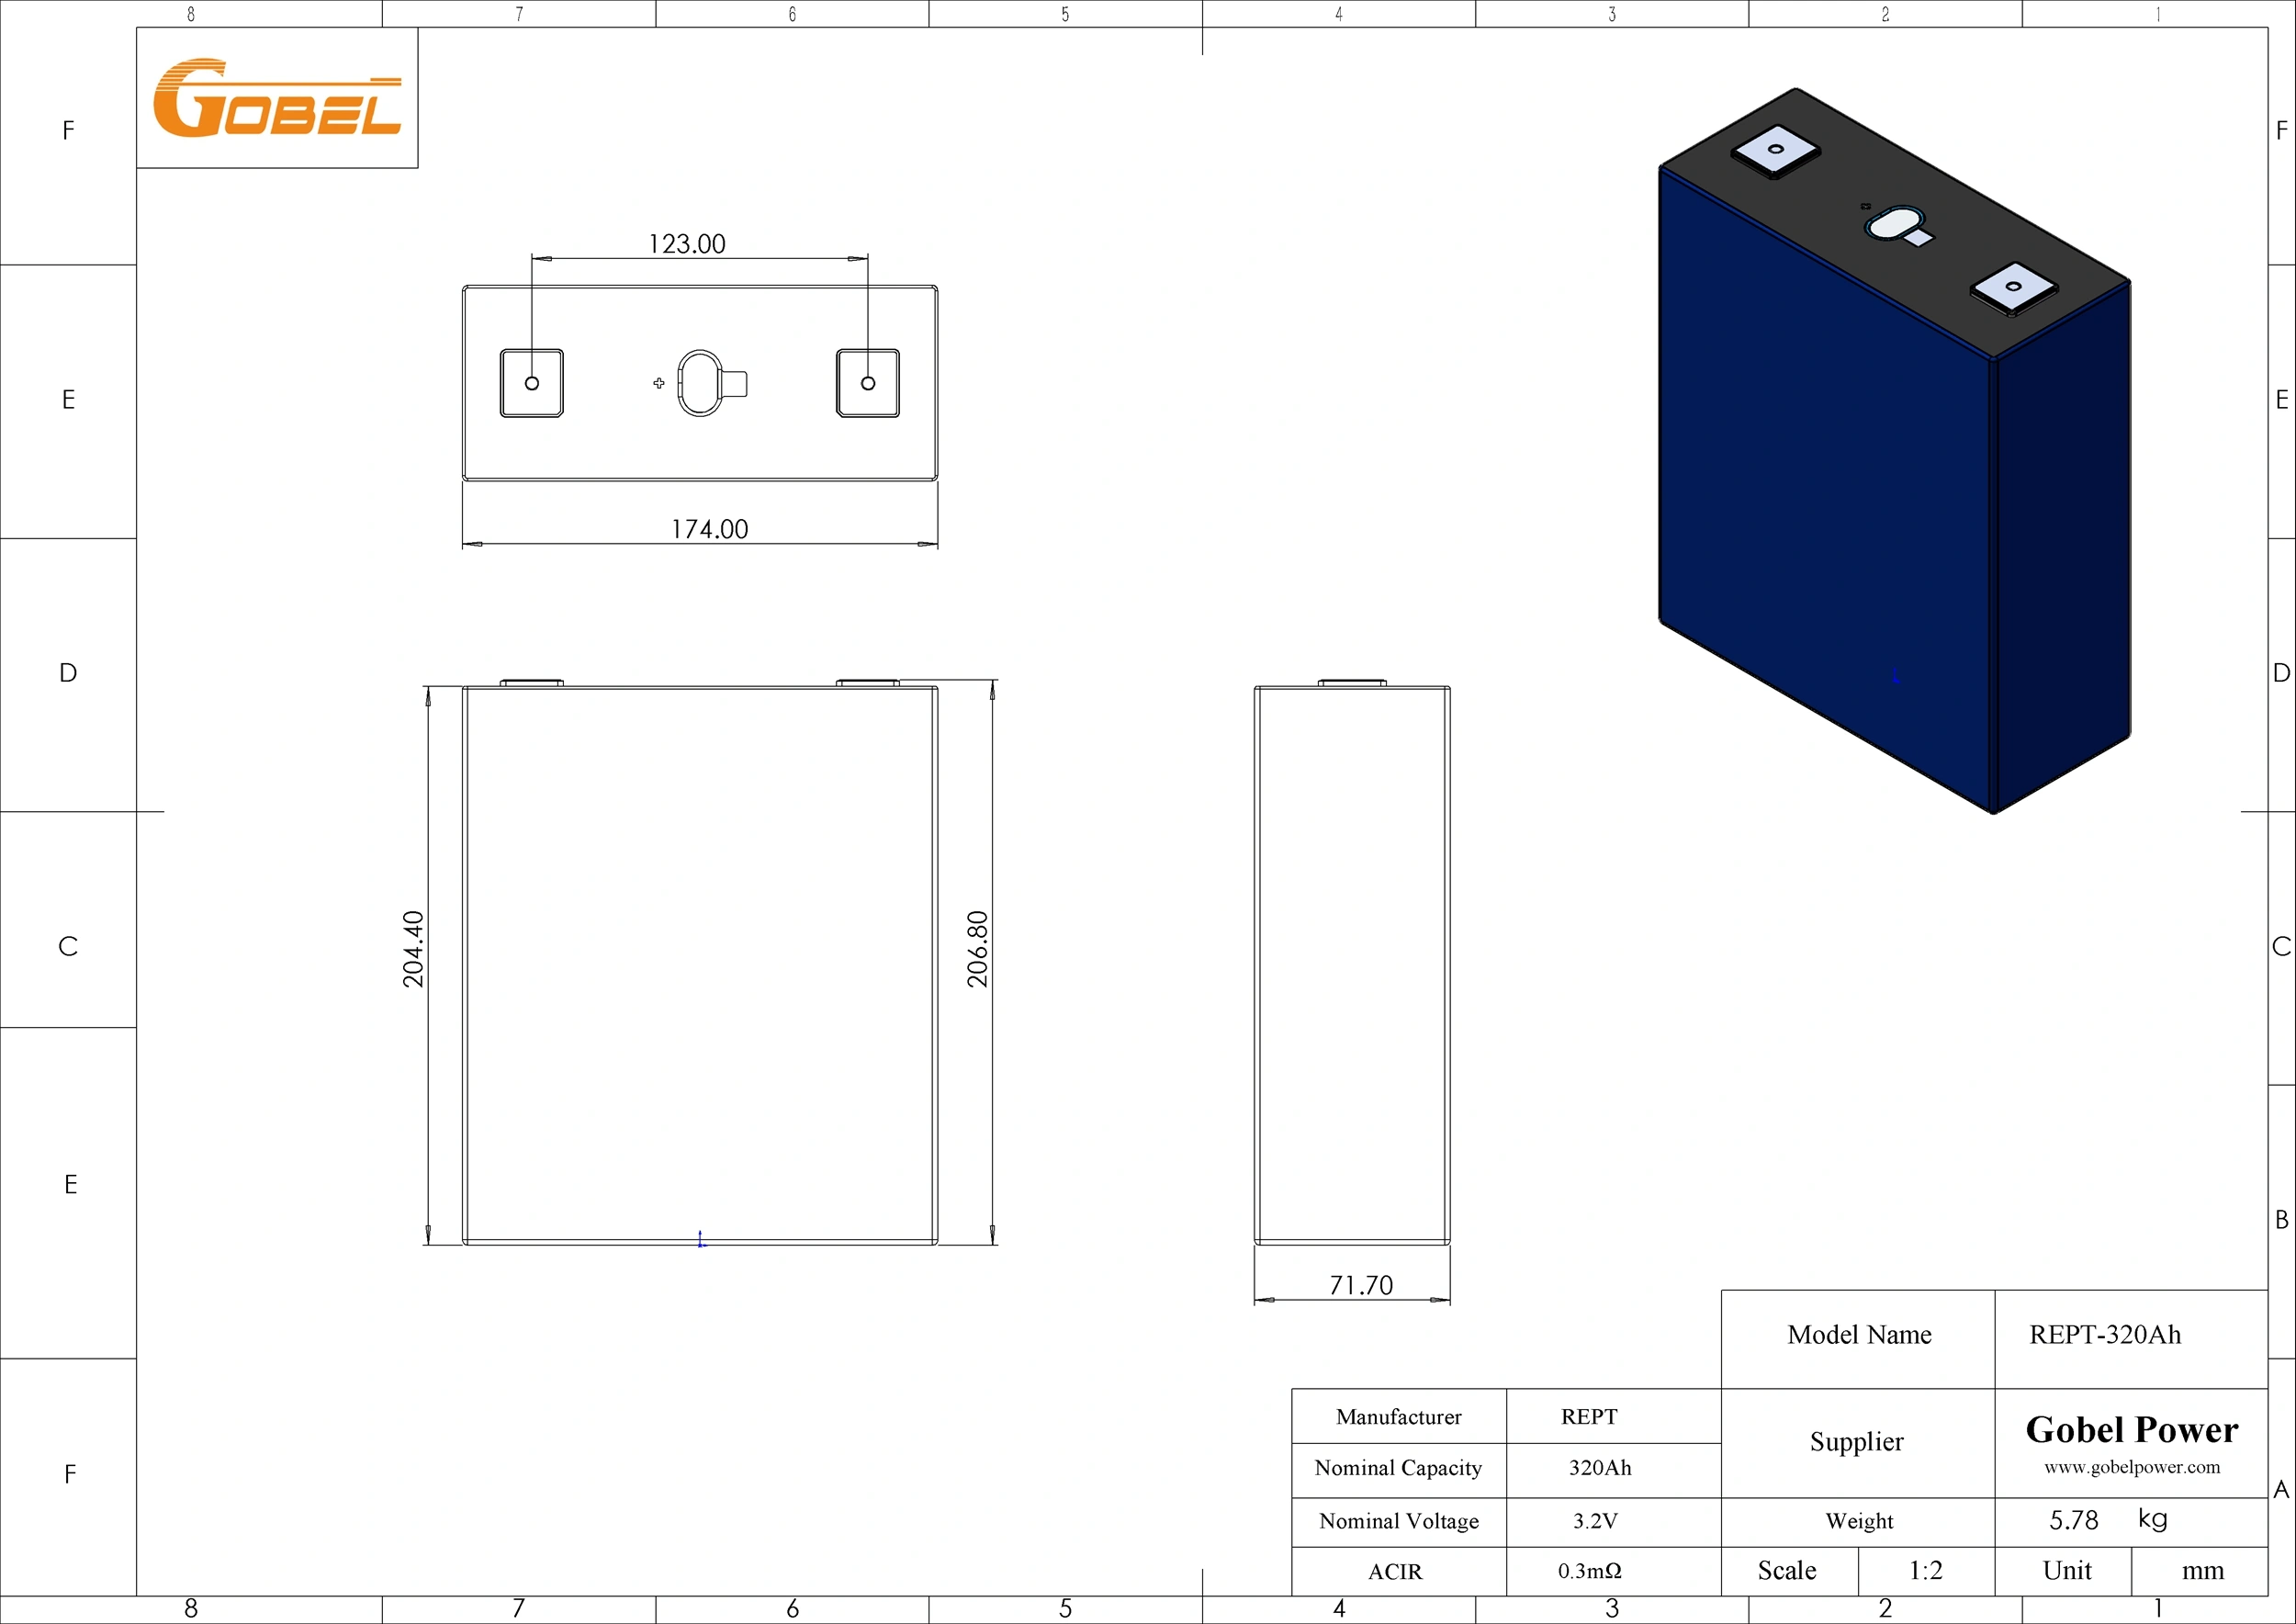 EVE 320Ah LiFePO4 Battery Cell CAD Drawing with Dimensions and Main Parameters